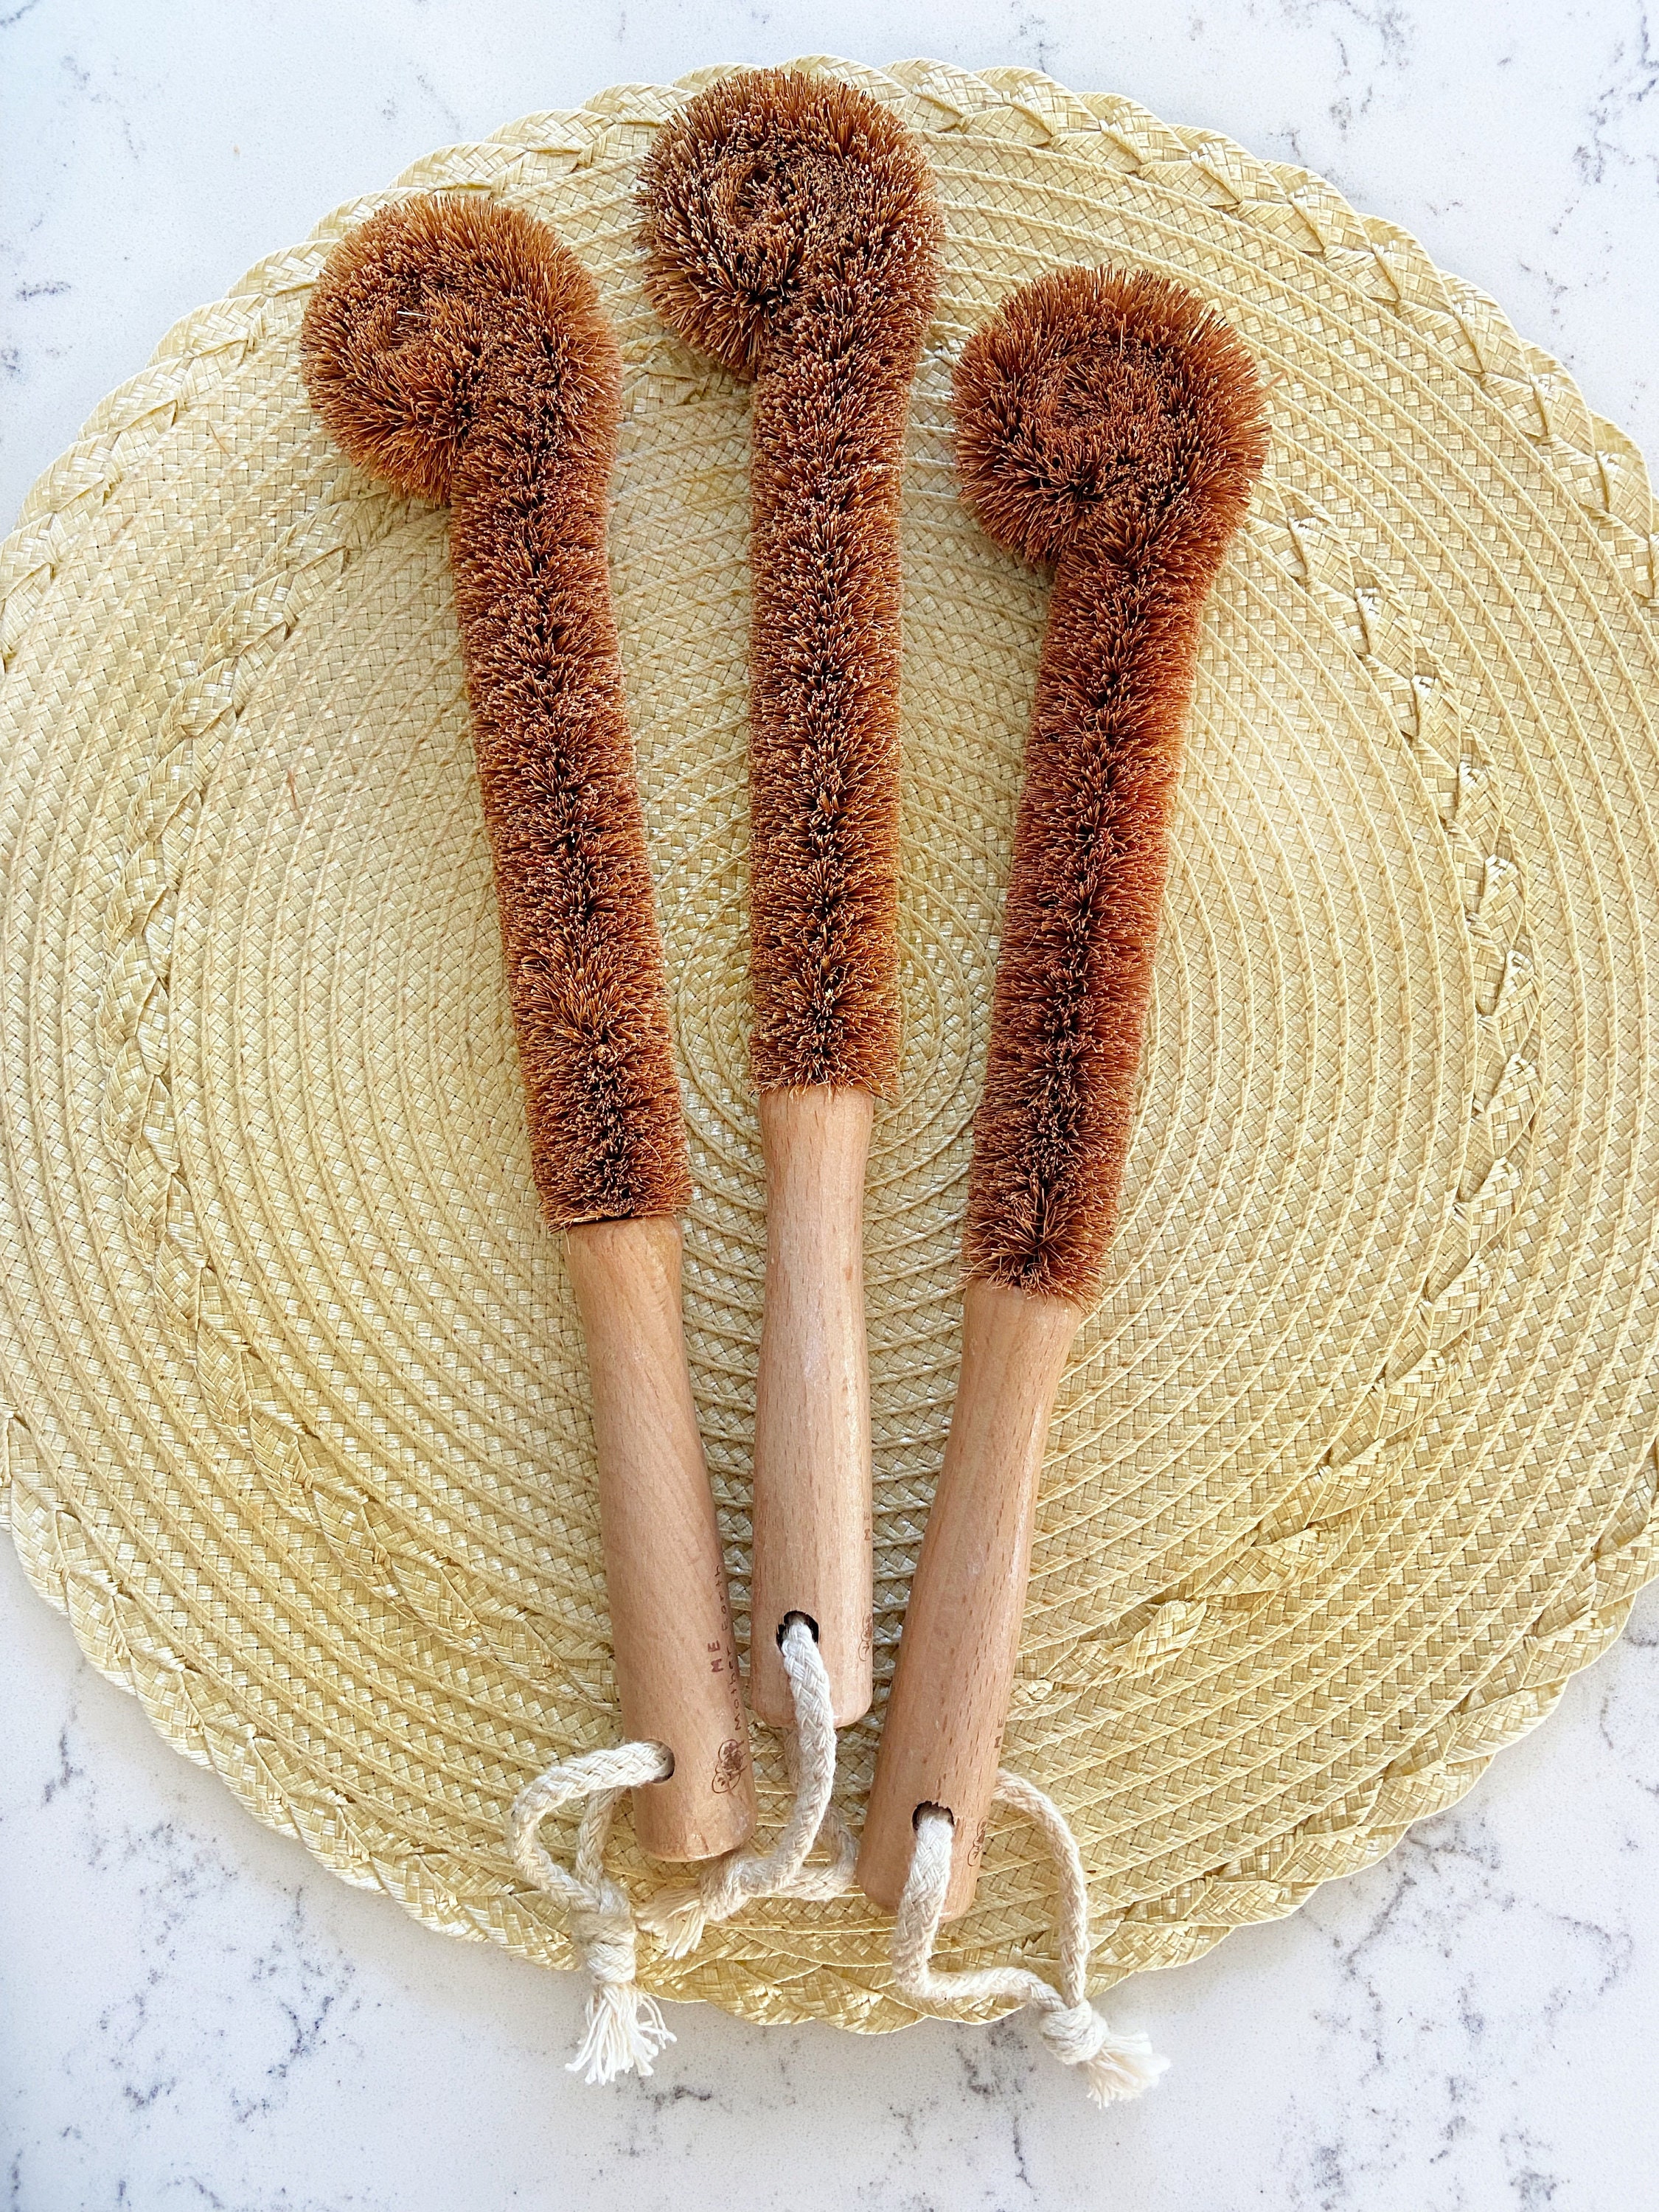 2 Pcs Multifunctional Brush Cleaning Brush Kitchen Scrub Brush with Handle,  Skinny Small Scrub Brushes for Cleaning Bathroom Shower Kitchen Pot  Cleaning Brushes for Home Use 